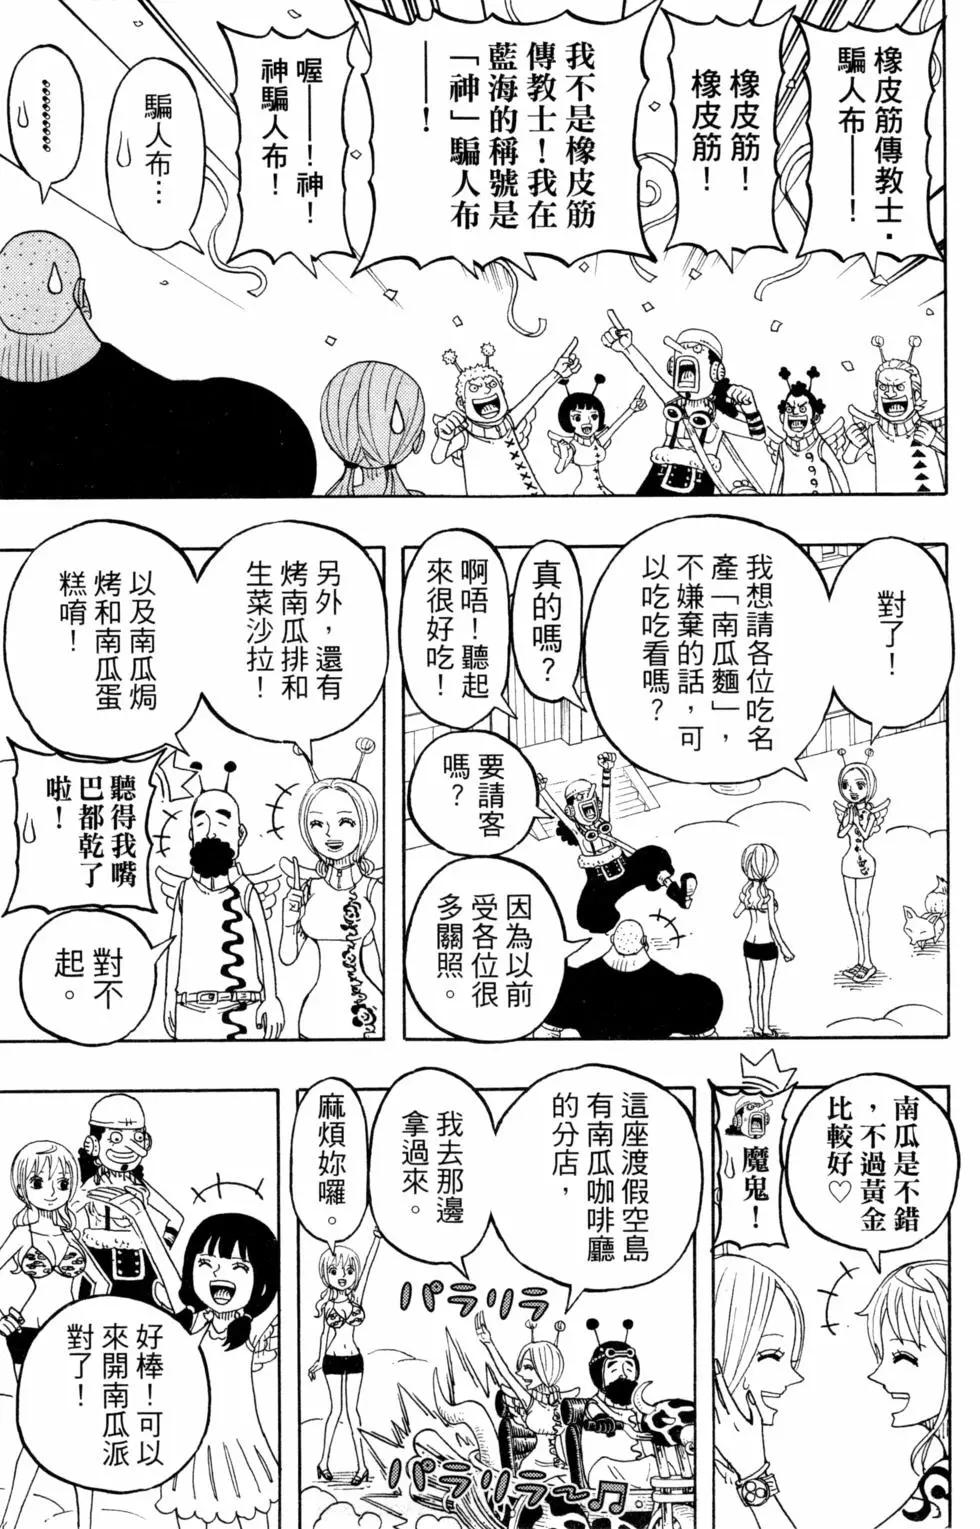 One piece party - 第06卷(2/4) - 6